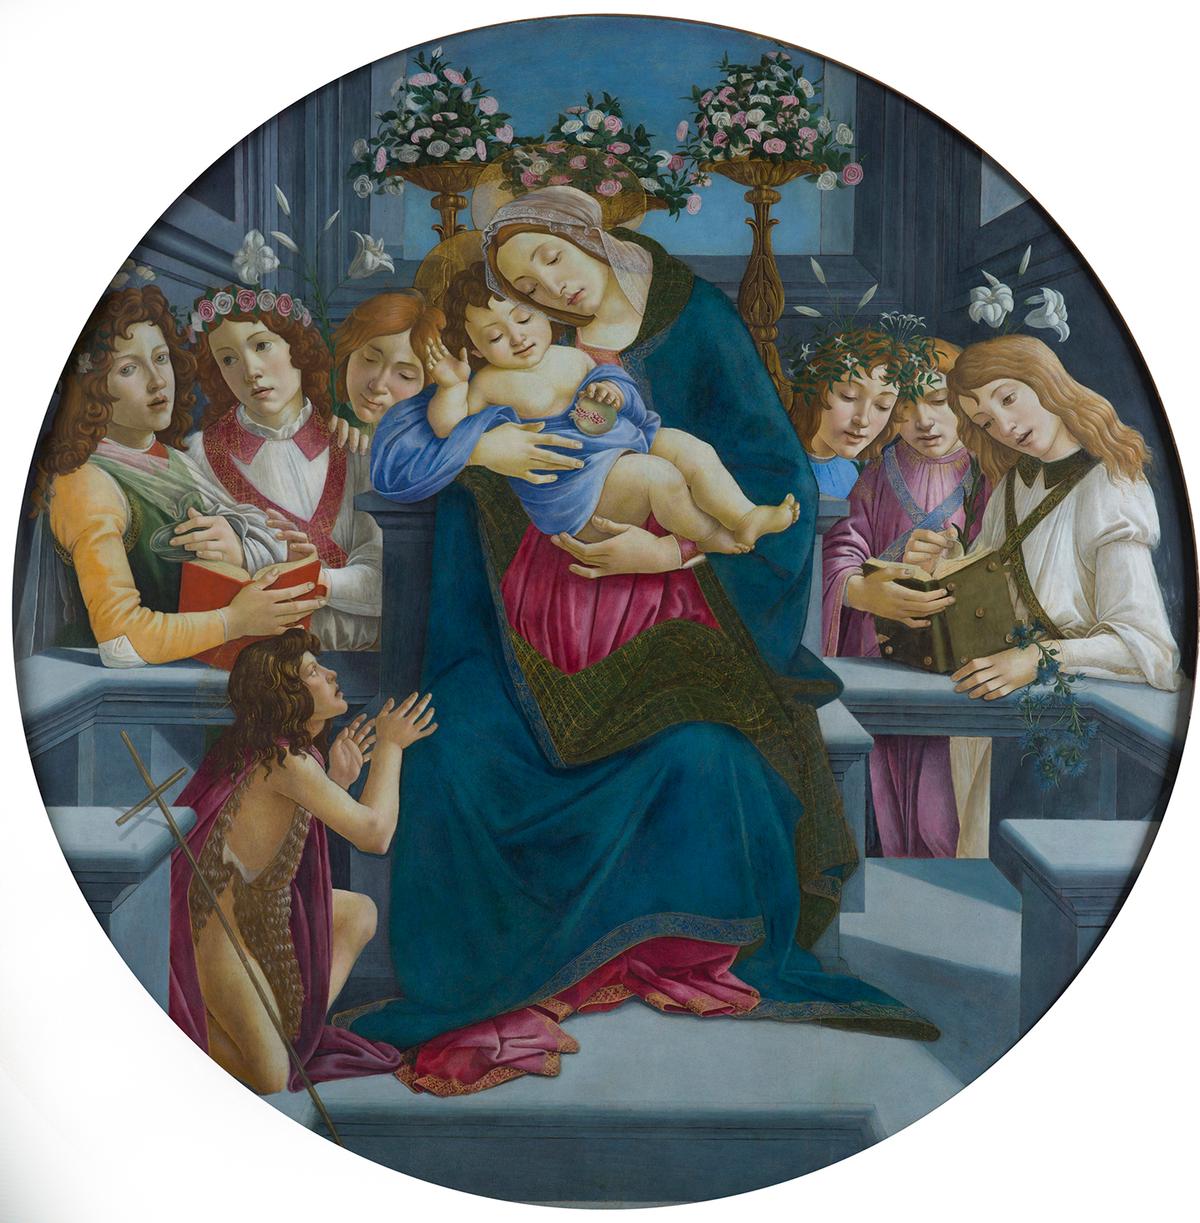 "Virgin and Child with Saint John the Baptist and Six Singing Angels," circa 1490, by Sandro Botticelli and Workshop. Tempera on panel; 67 inches. Borghese Gallery, Rome. (Courtesy of Legion of Honor)